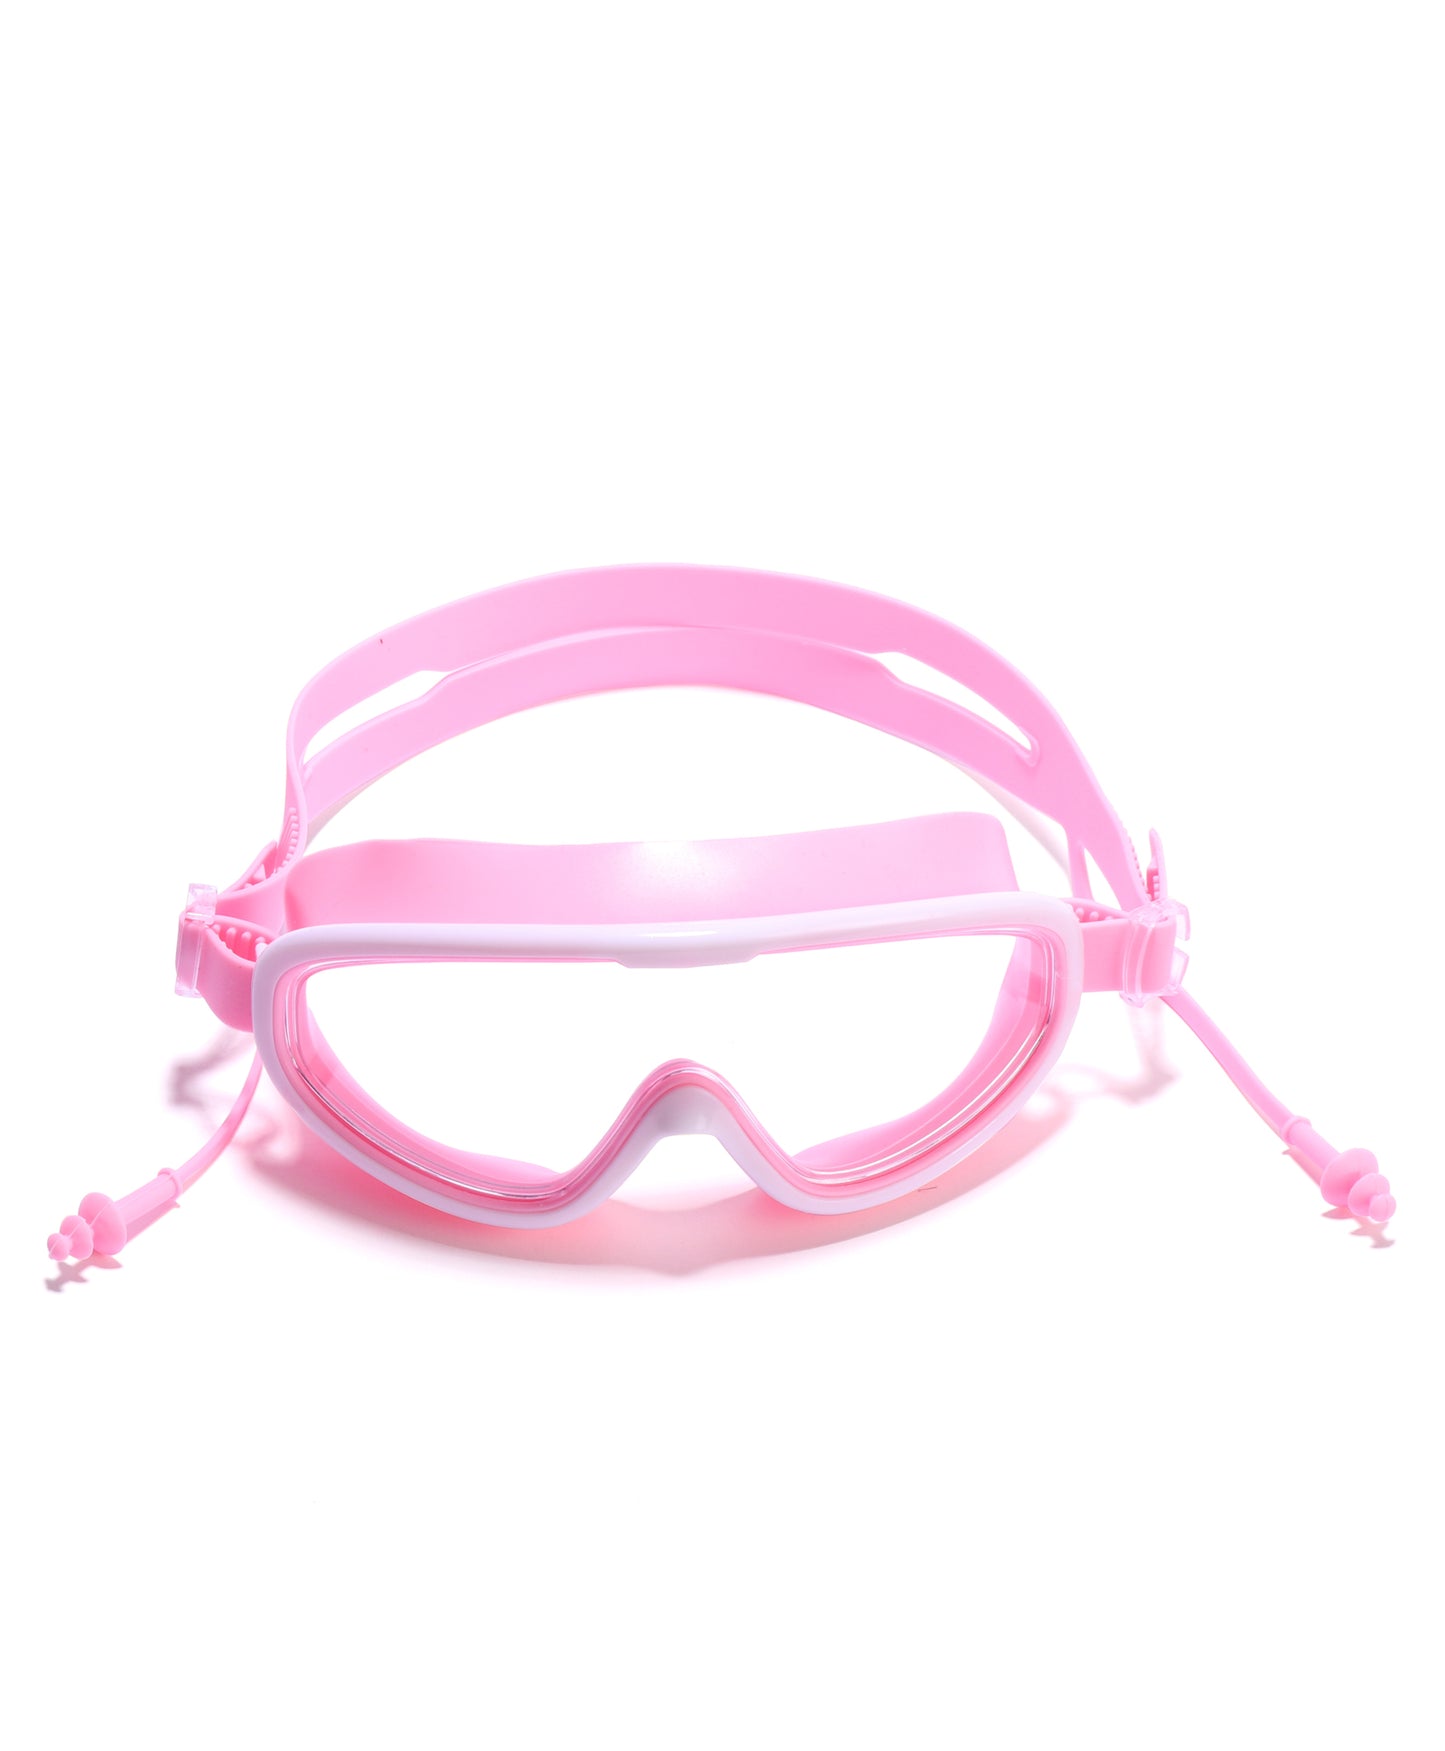 BIG FRAME SWIMMING GOGGLES WITH EAR PLUGS - PINK